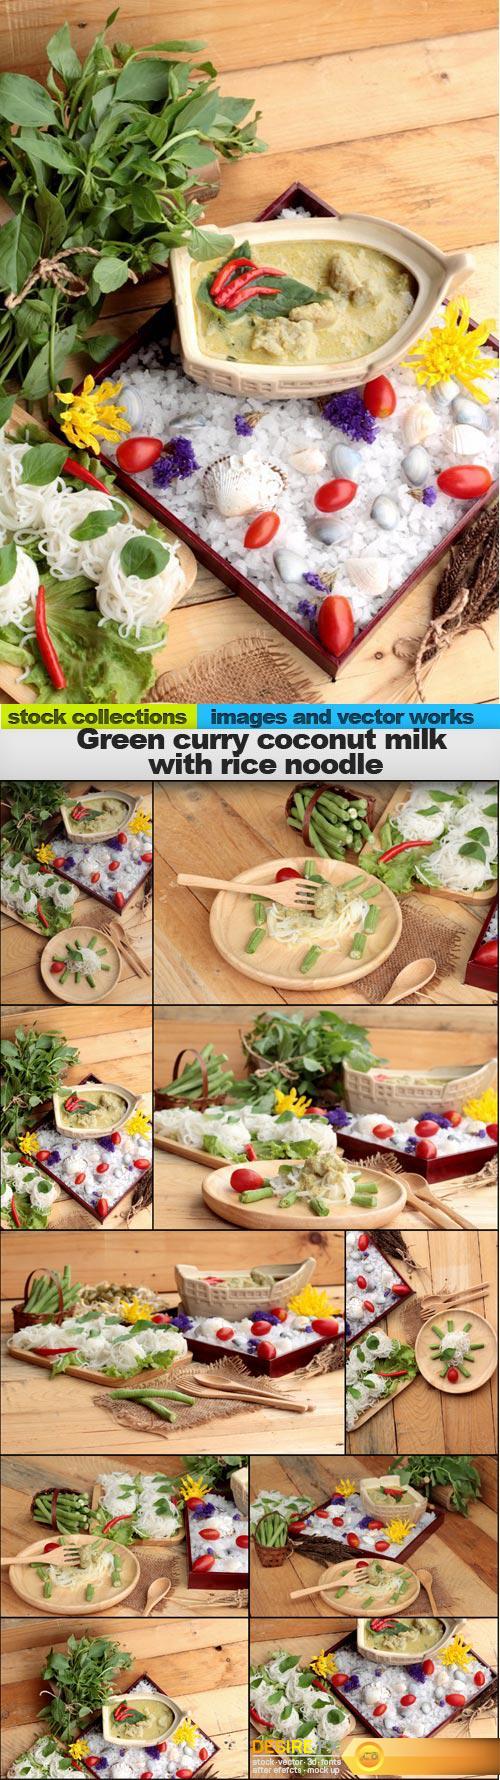 Green curry coconut milk with rice noodle, 10 x UHQ JPEG